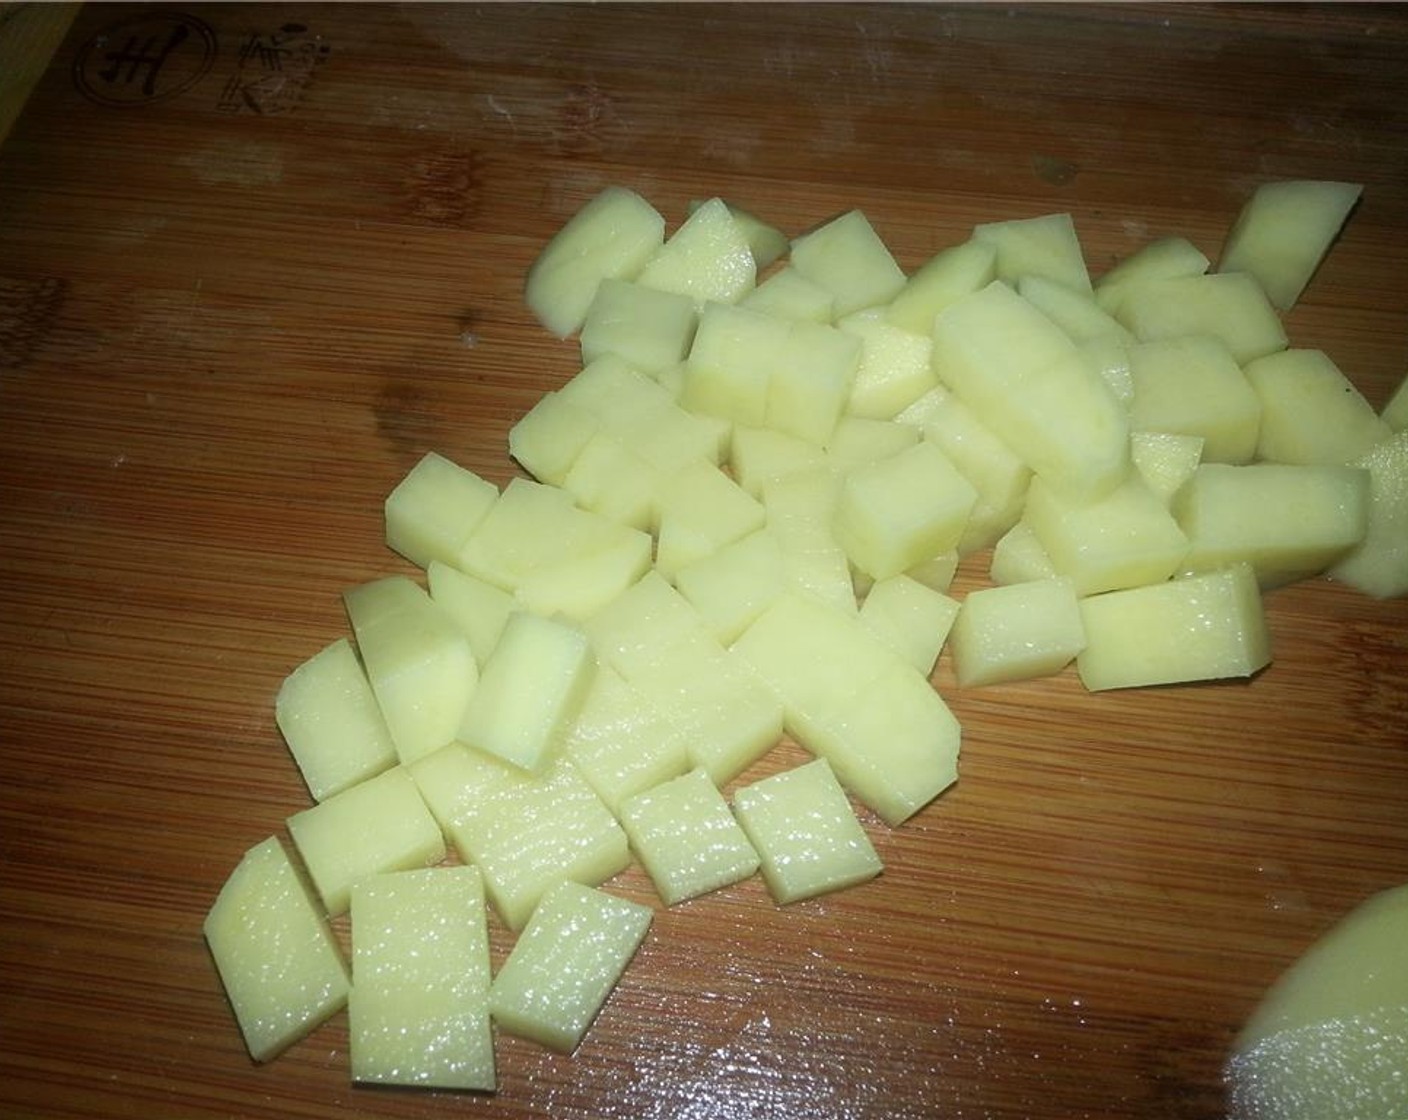 step 6 Peel and cube the Potatoes (1.5 lb). Place the cubes in a bowl with cold water, so they do not oxidize.